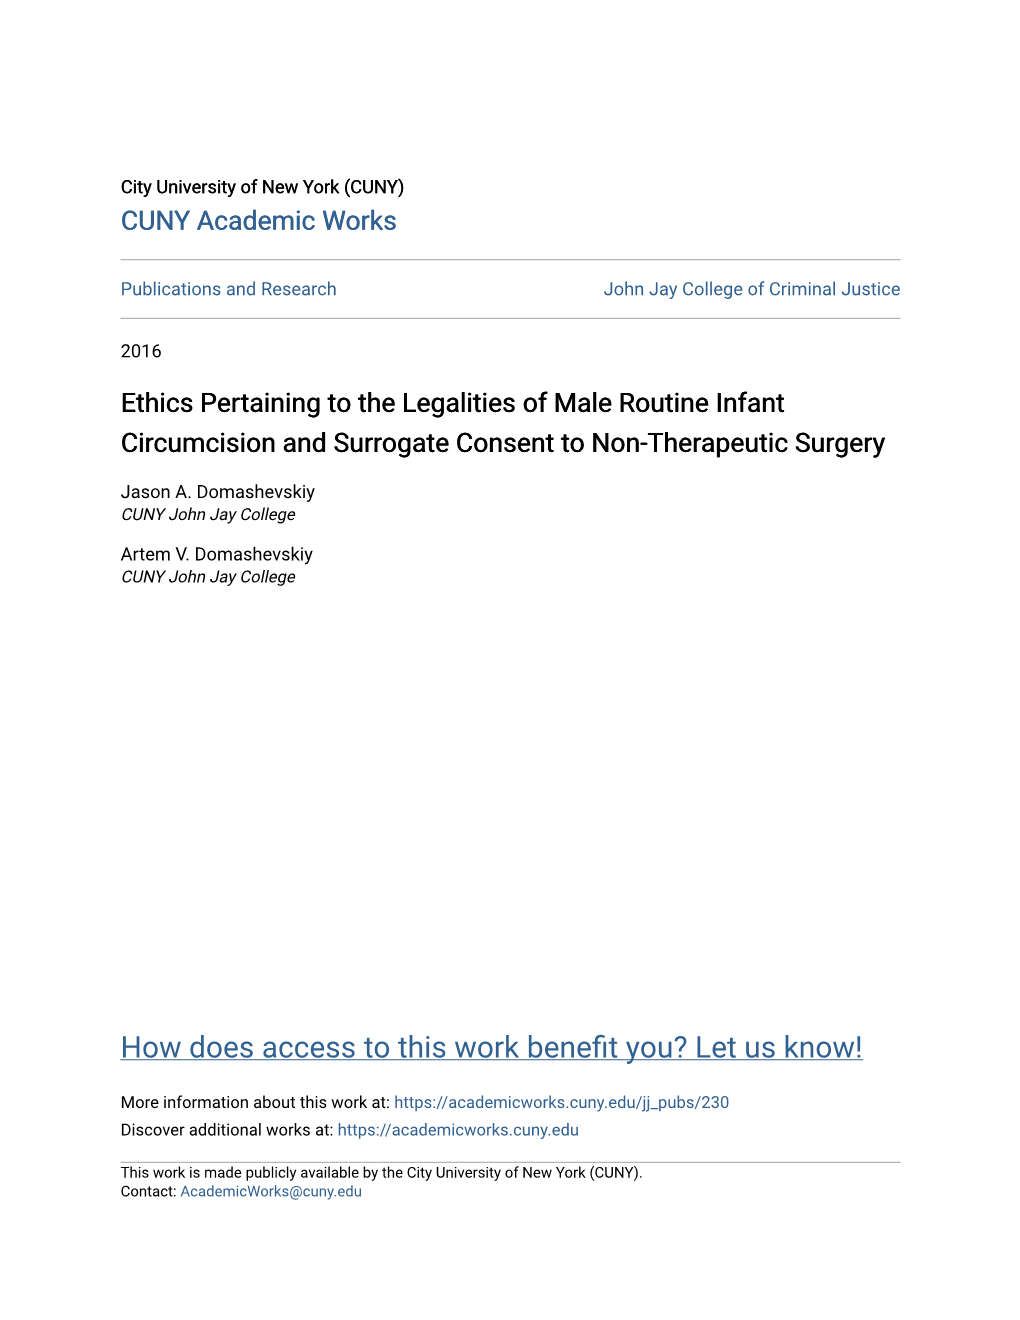 Ethics Pertaining to the Legalities of Male Routine Infant Circumcision and Surrogate Consent to Non-Therapeutic Surgery